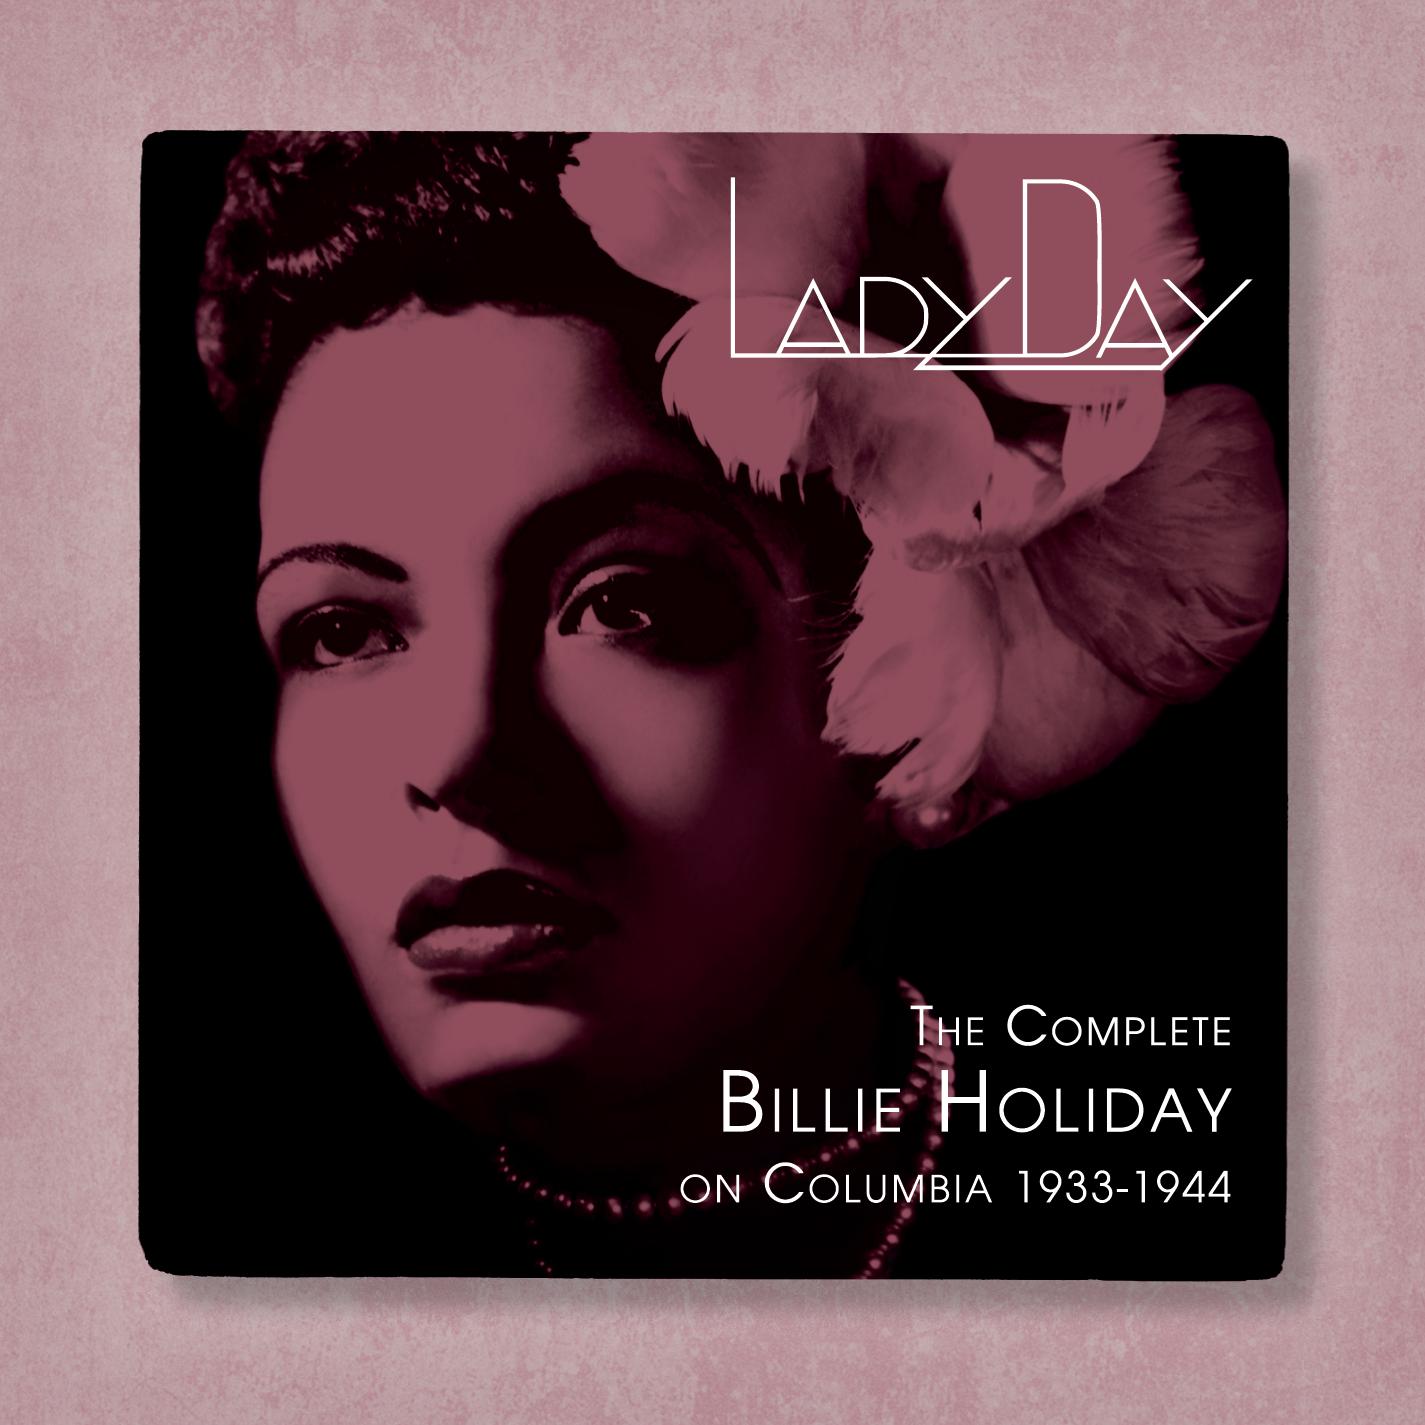 Lady Day: The Complete Billie Holiday on Columbia – 1933-1944